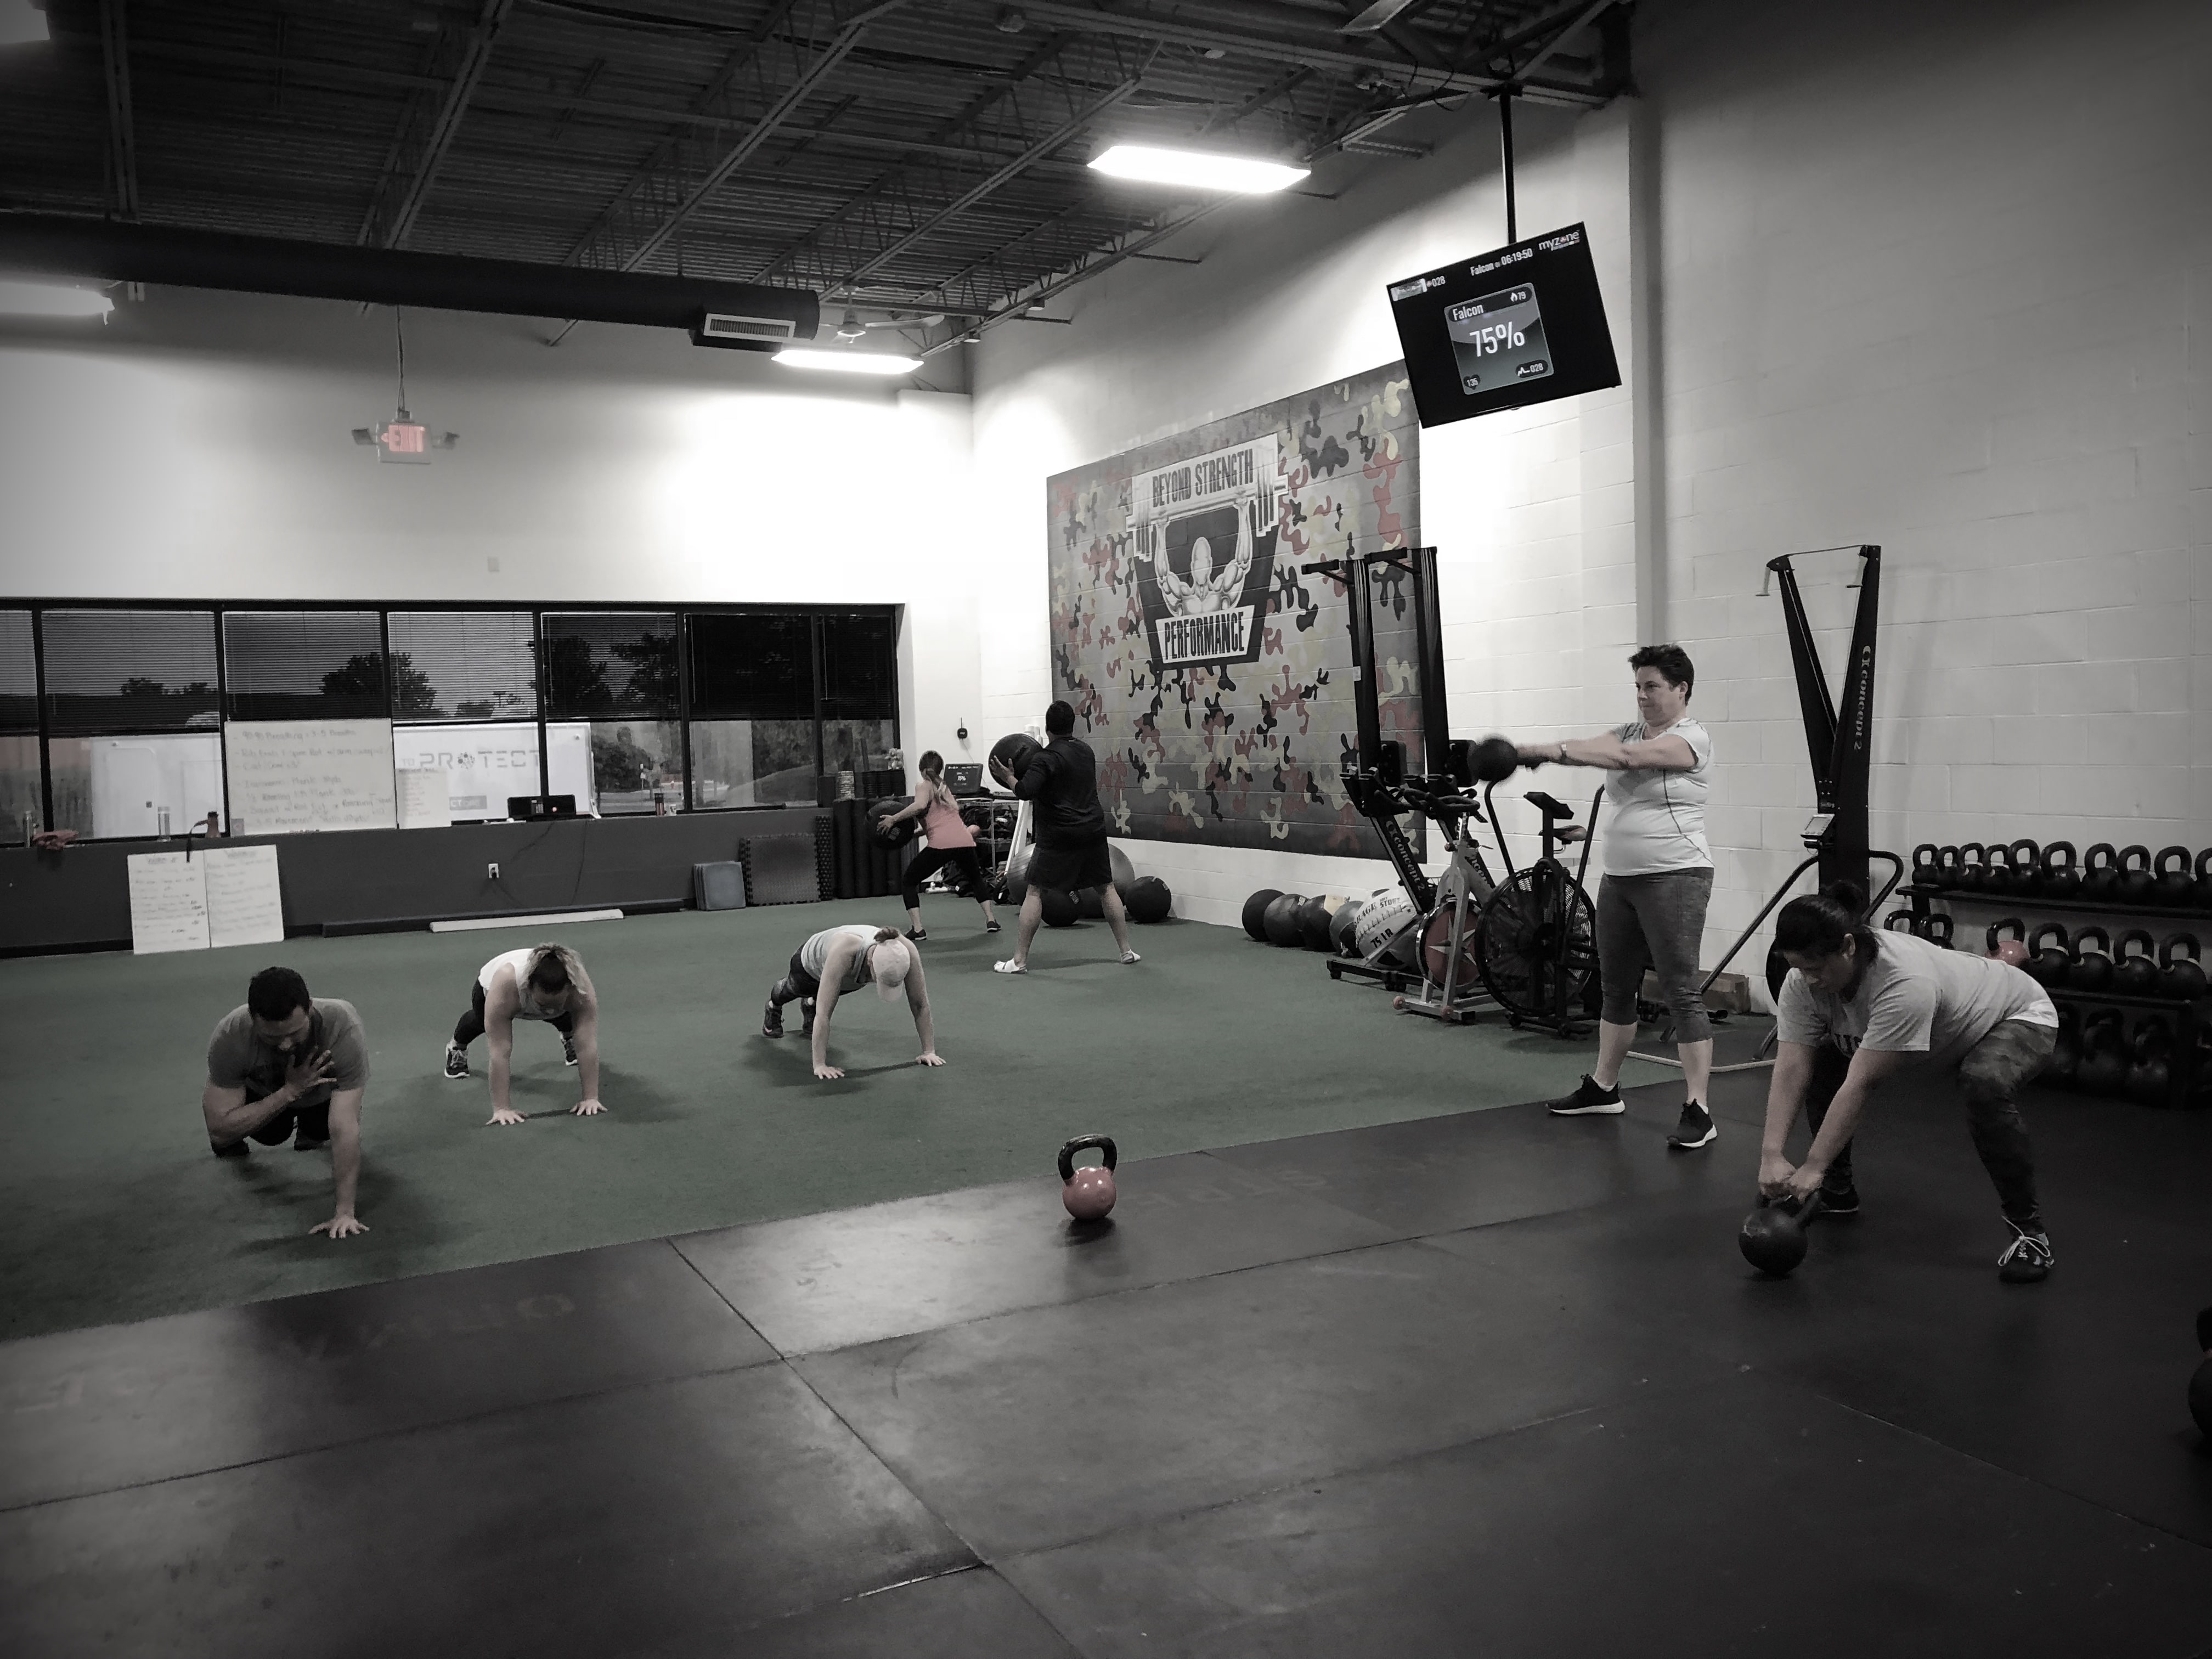 Metabolic Conditioning: Not your typical HIIT workout